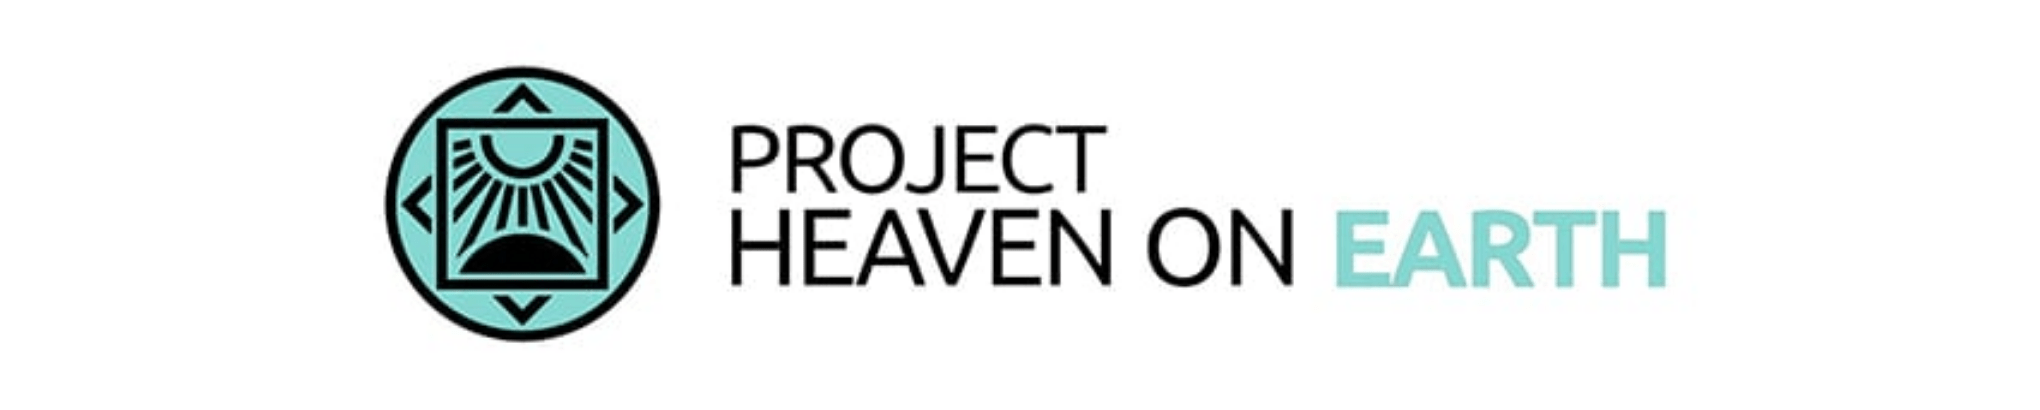 Project Heaven on Earth by Founder Martin Rutte